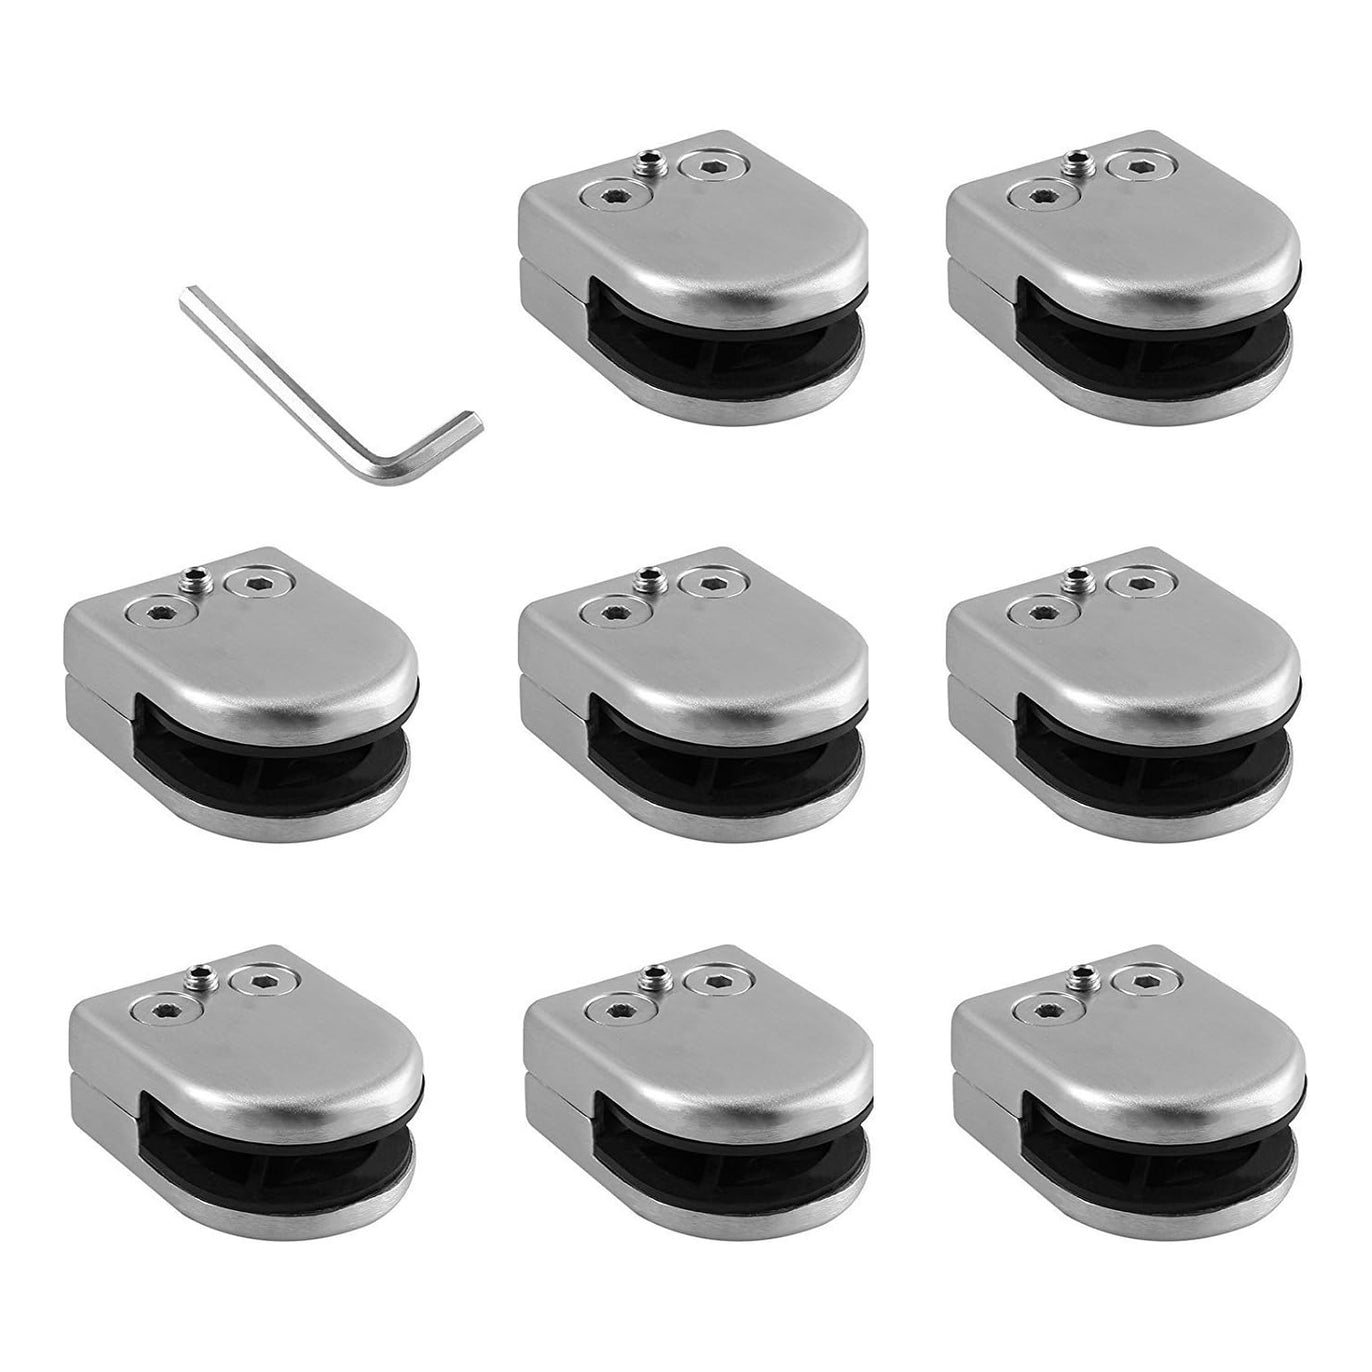 8 PCS 6-8mm(15/64-5/16 Inch) Square Glass Clamps